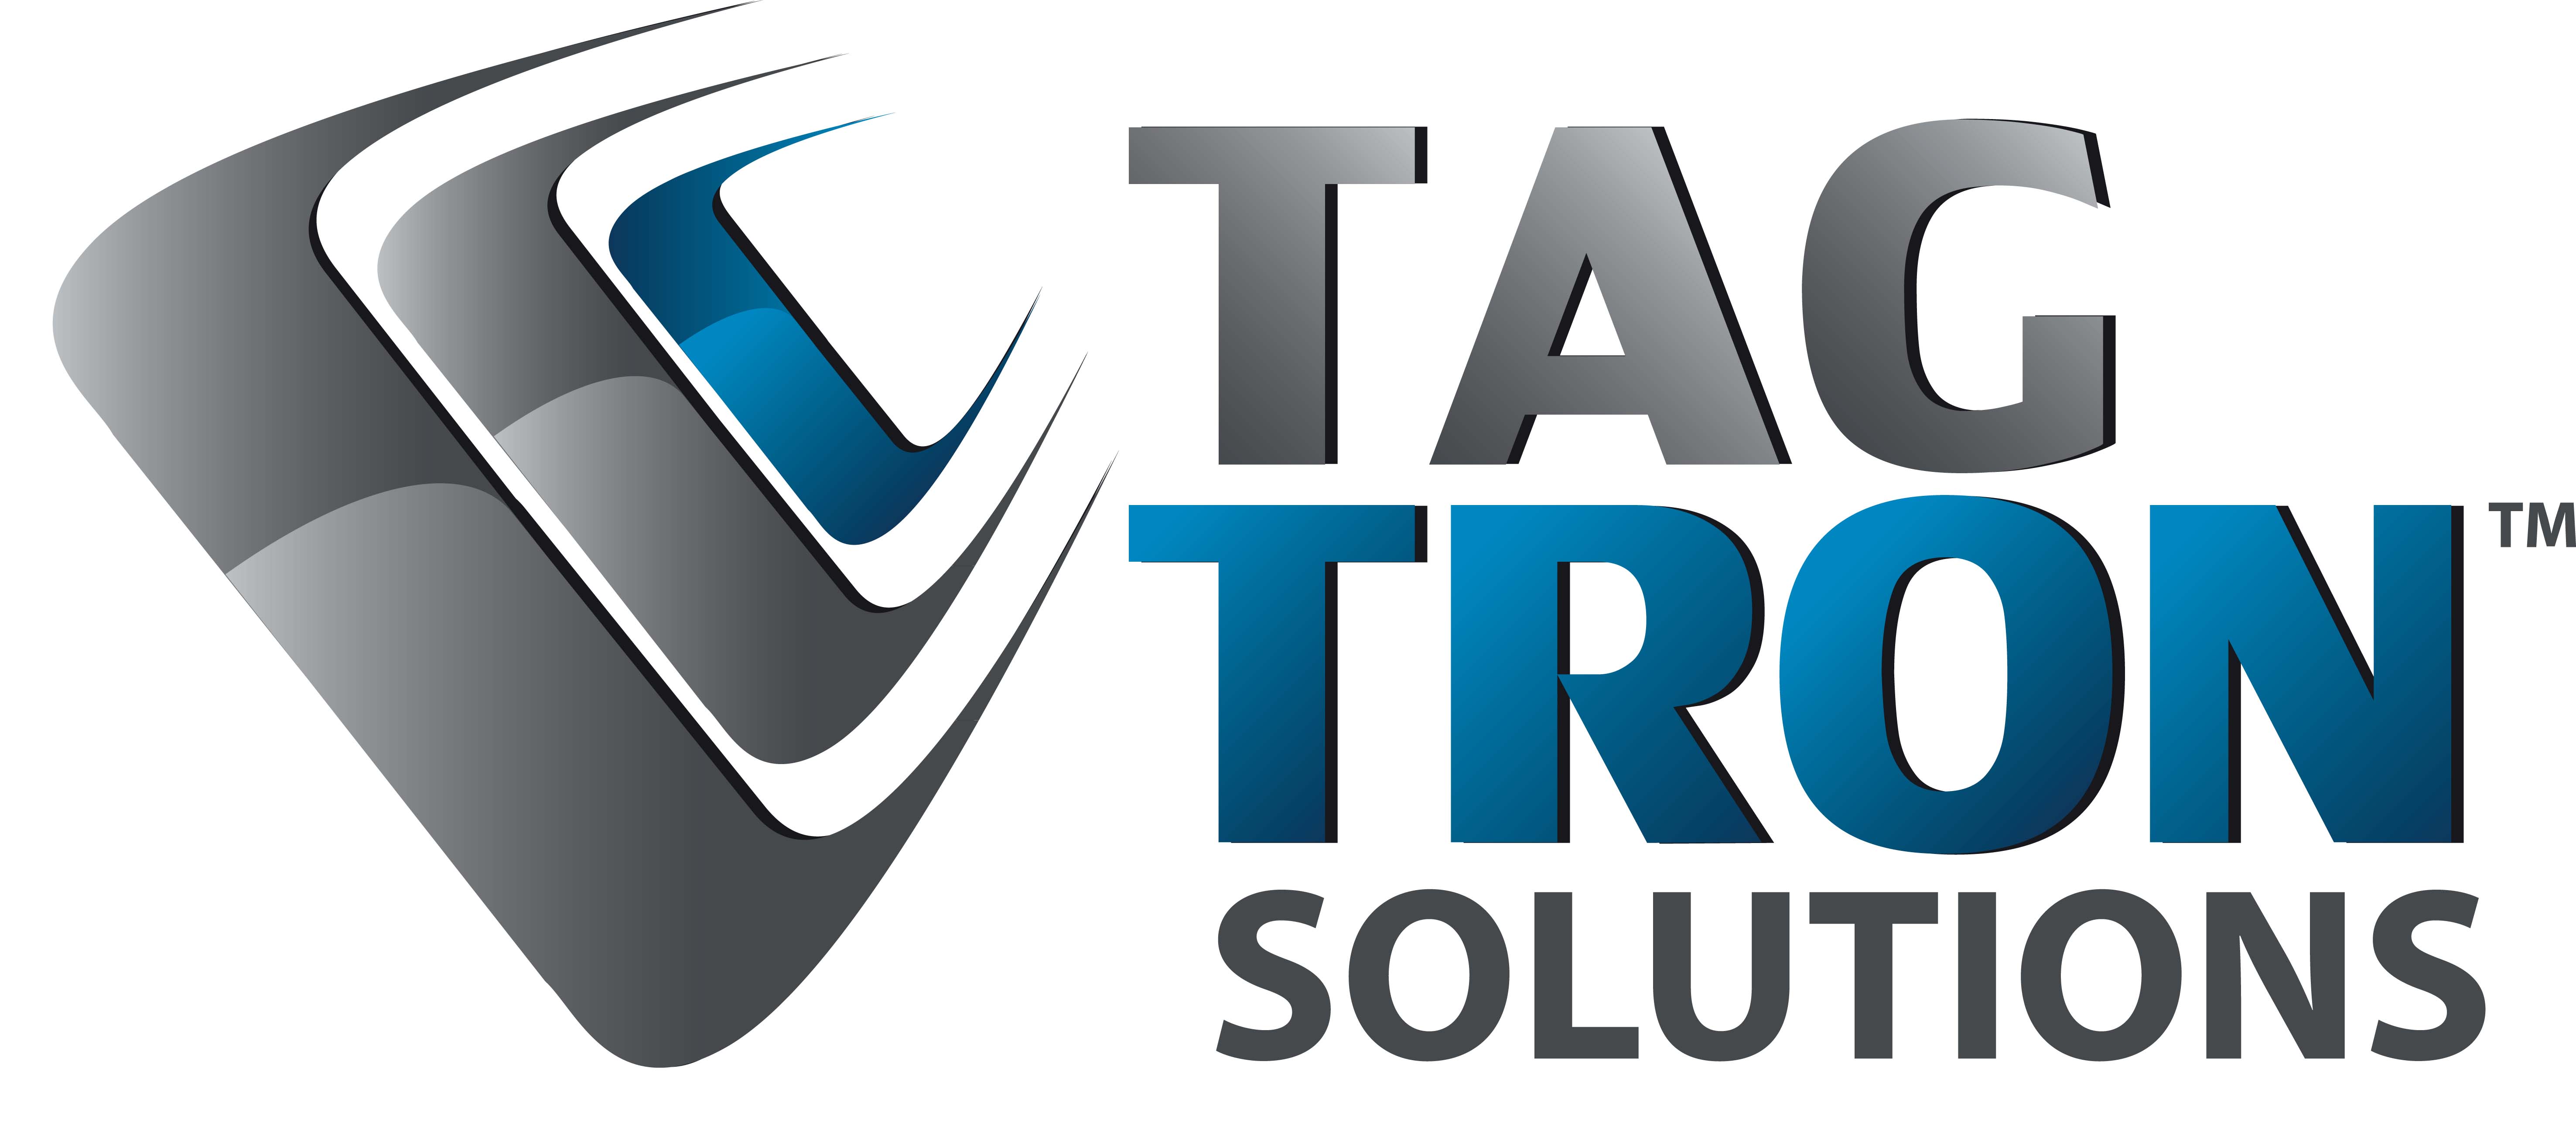 Tagtron Solutions